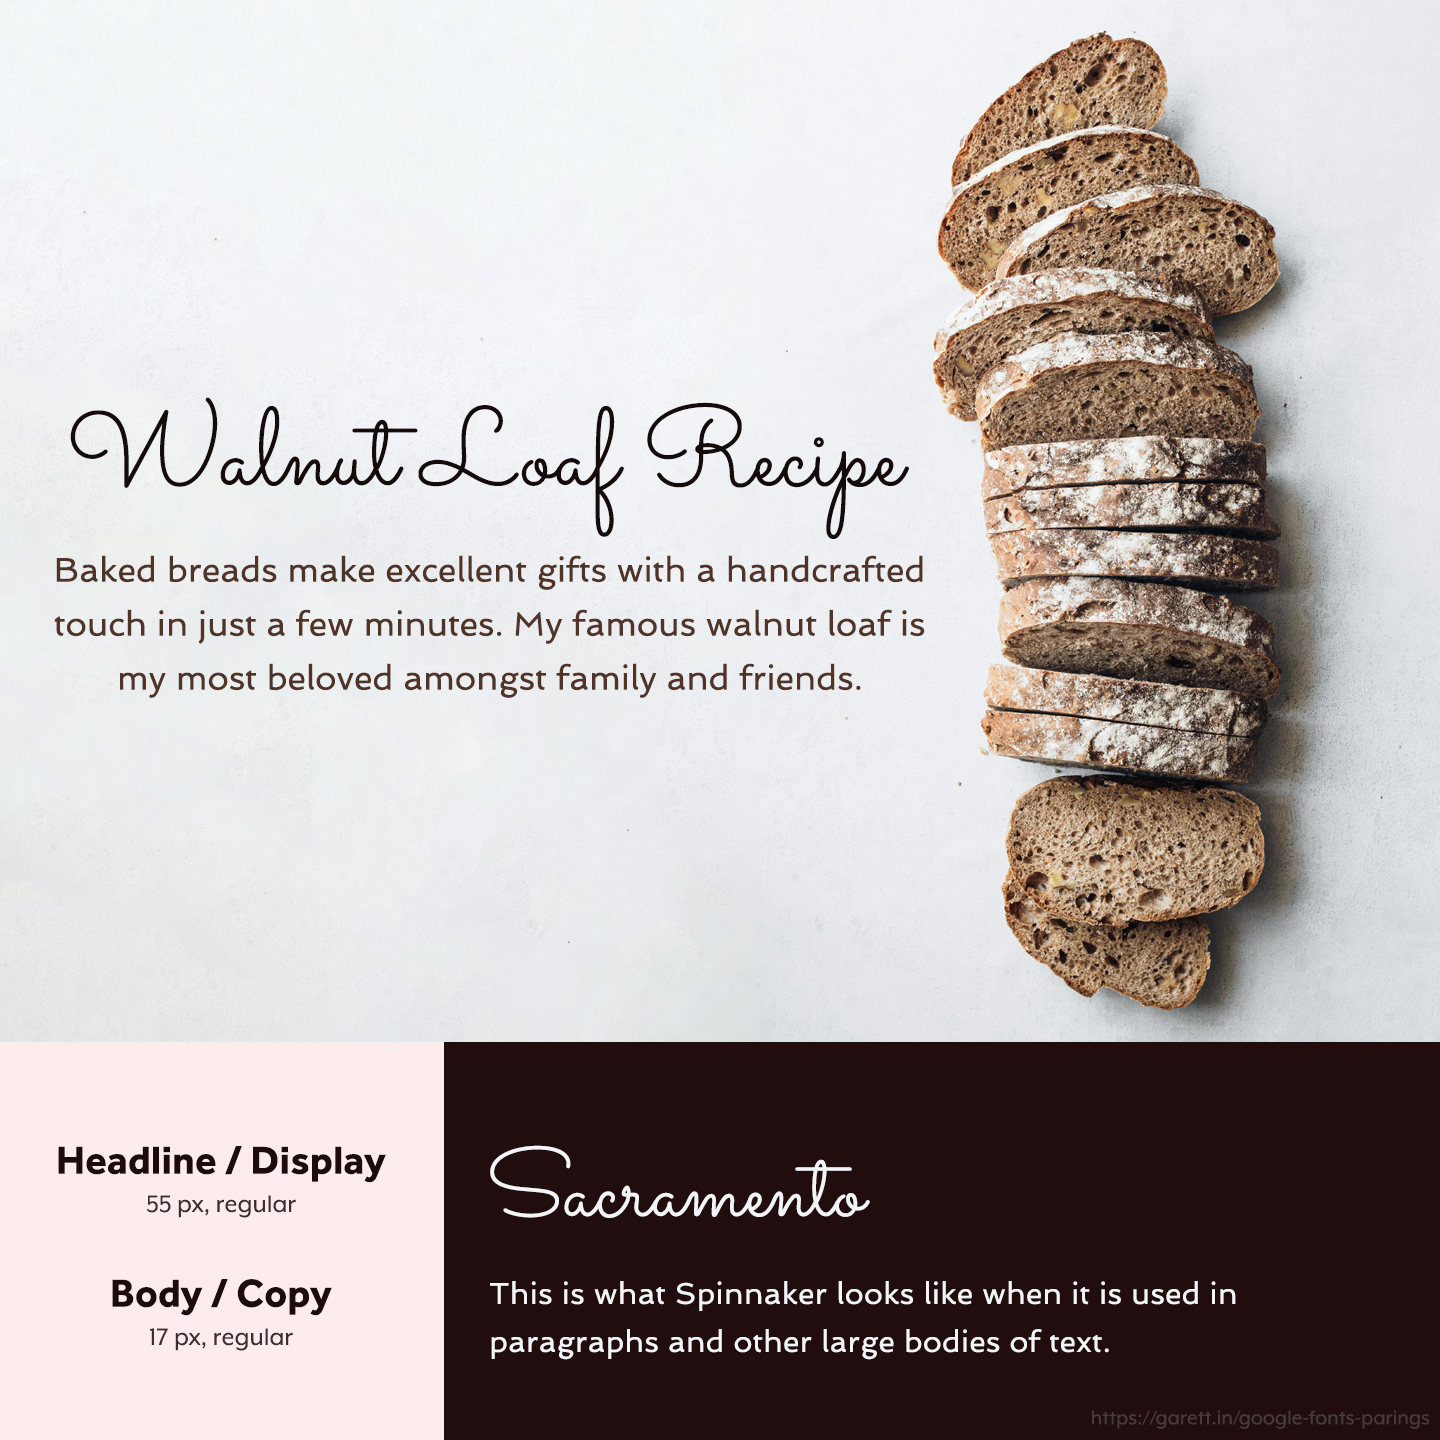 Sacramento and Spinnaker font pairing - 30 Google Font Pairings for Your Brand and Website